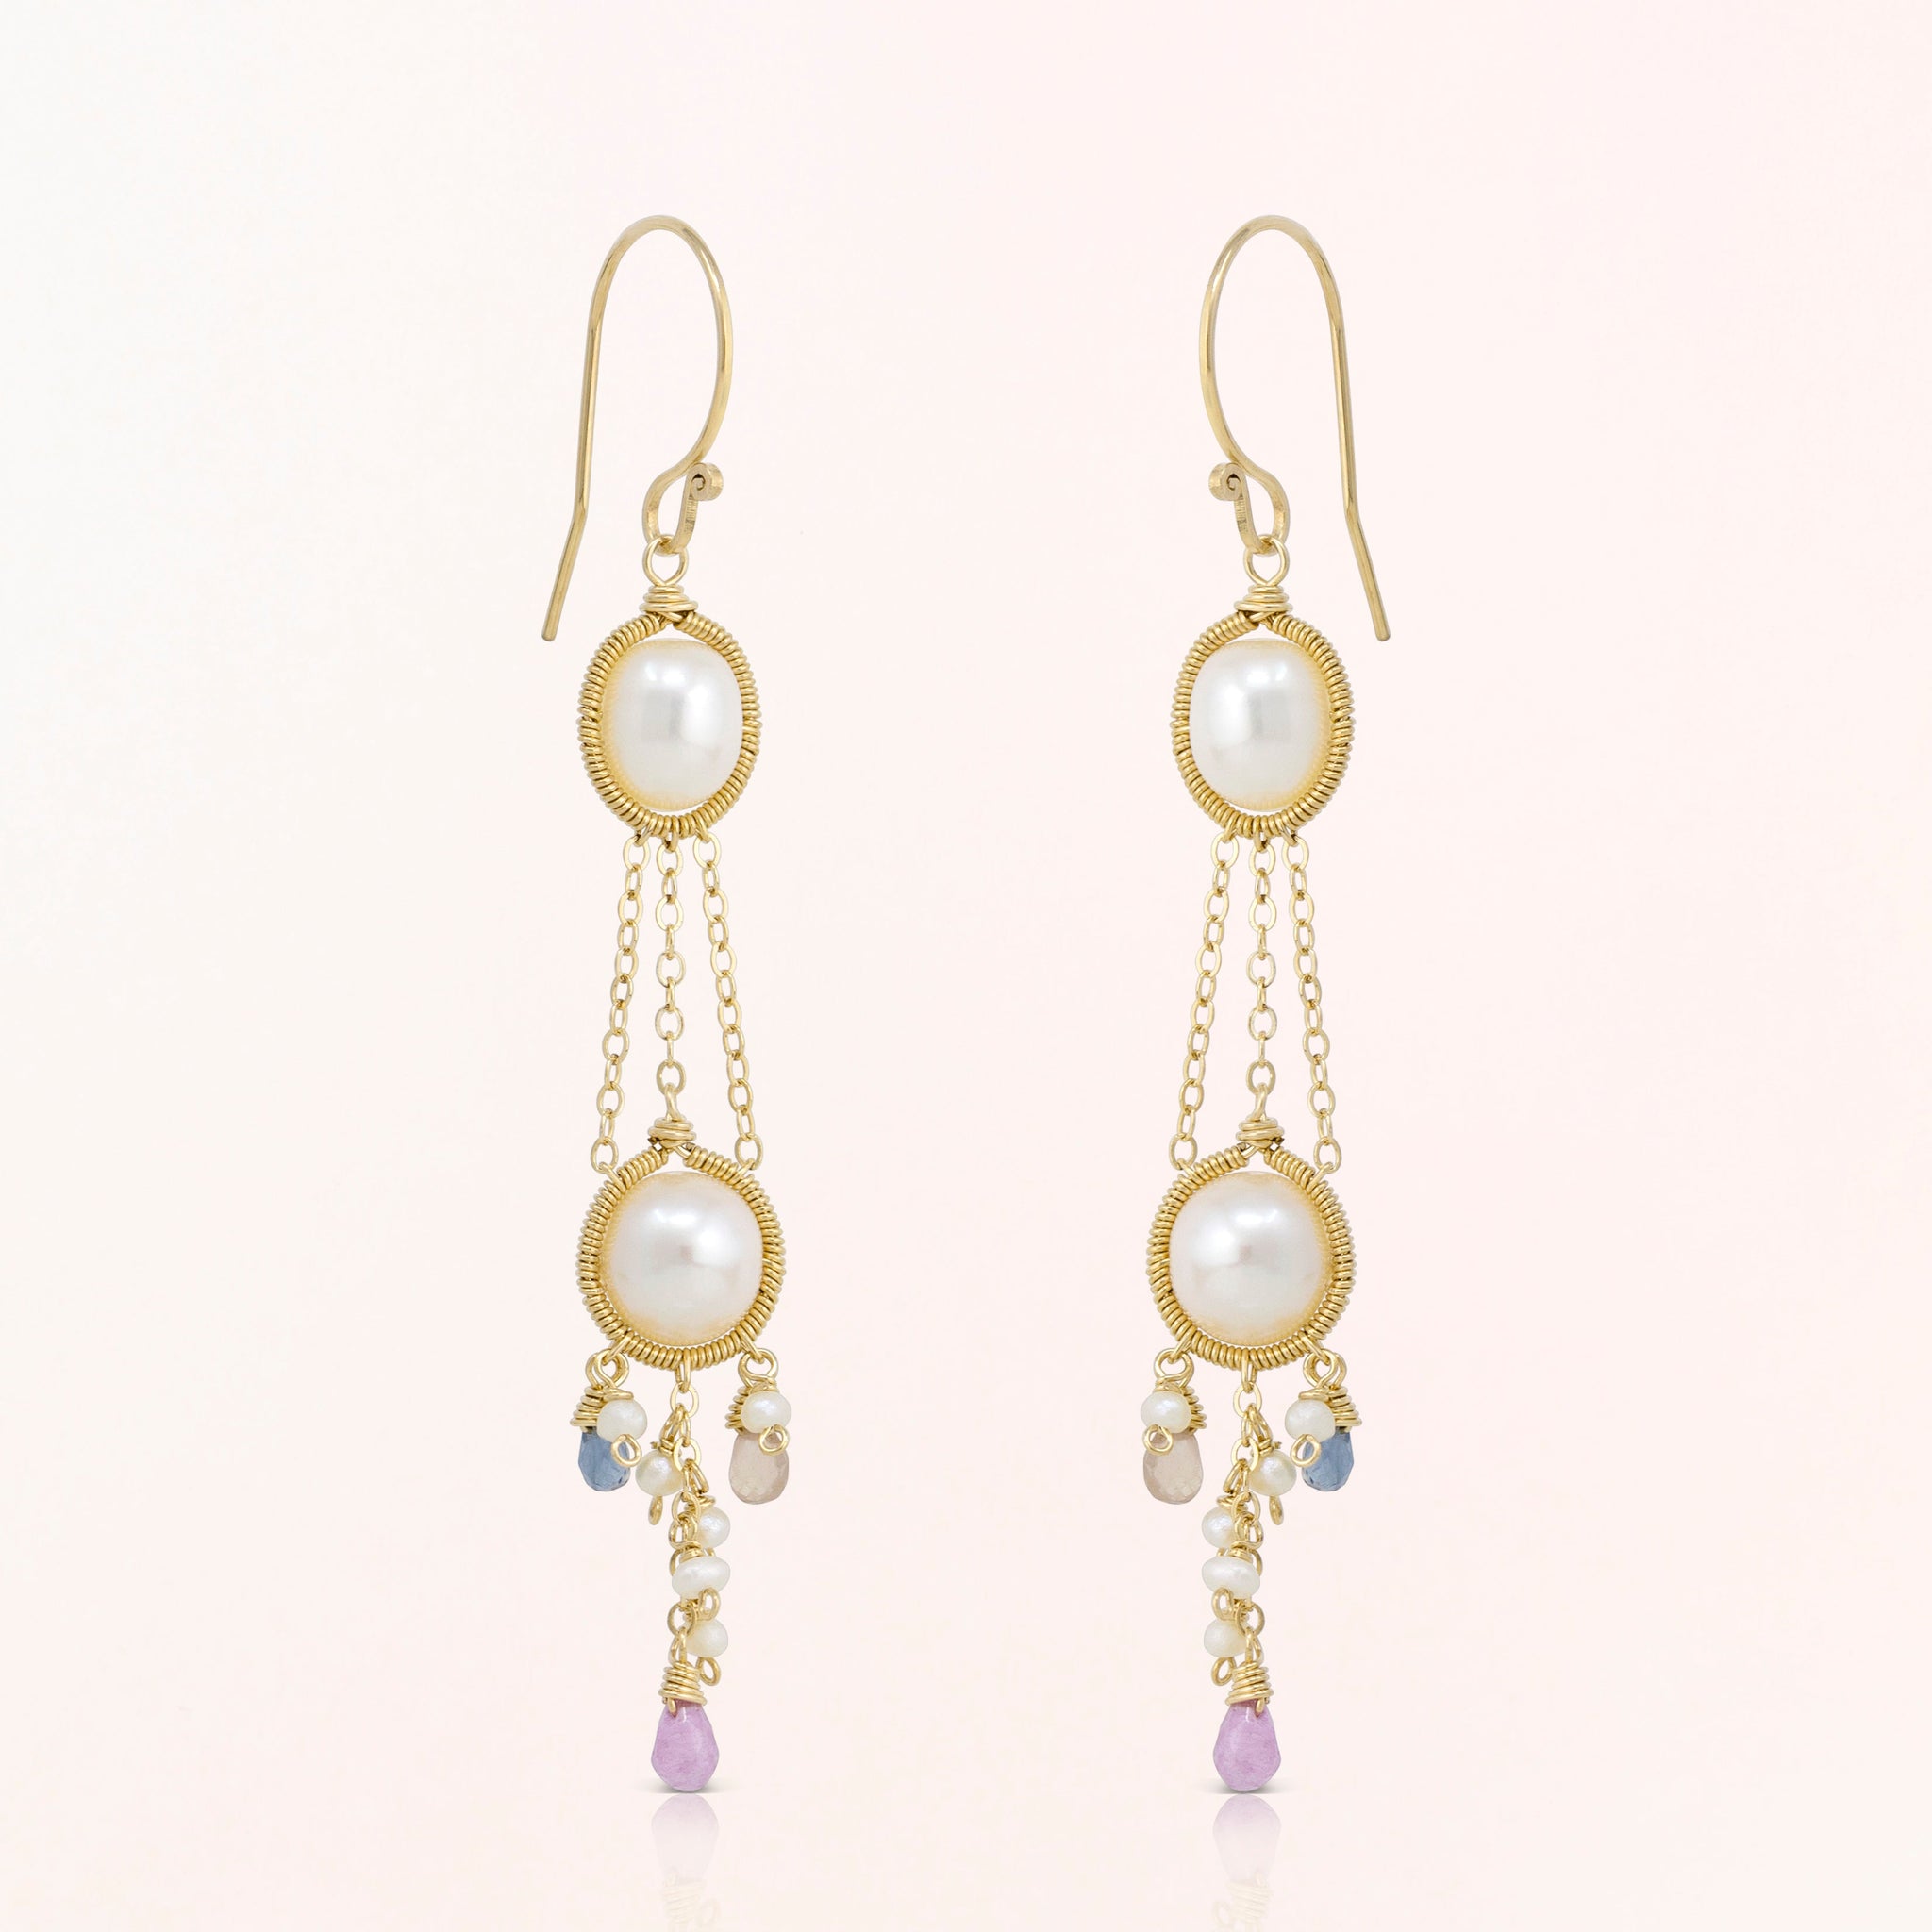 Double Pearl Earrings with Tourmaline Cluster